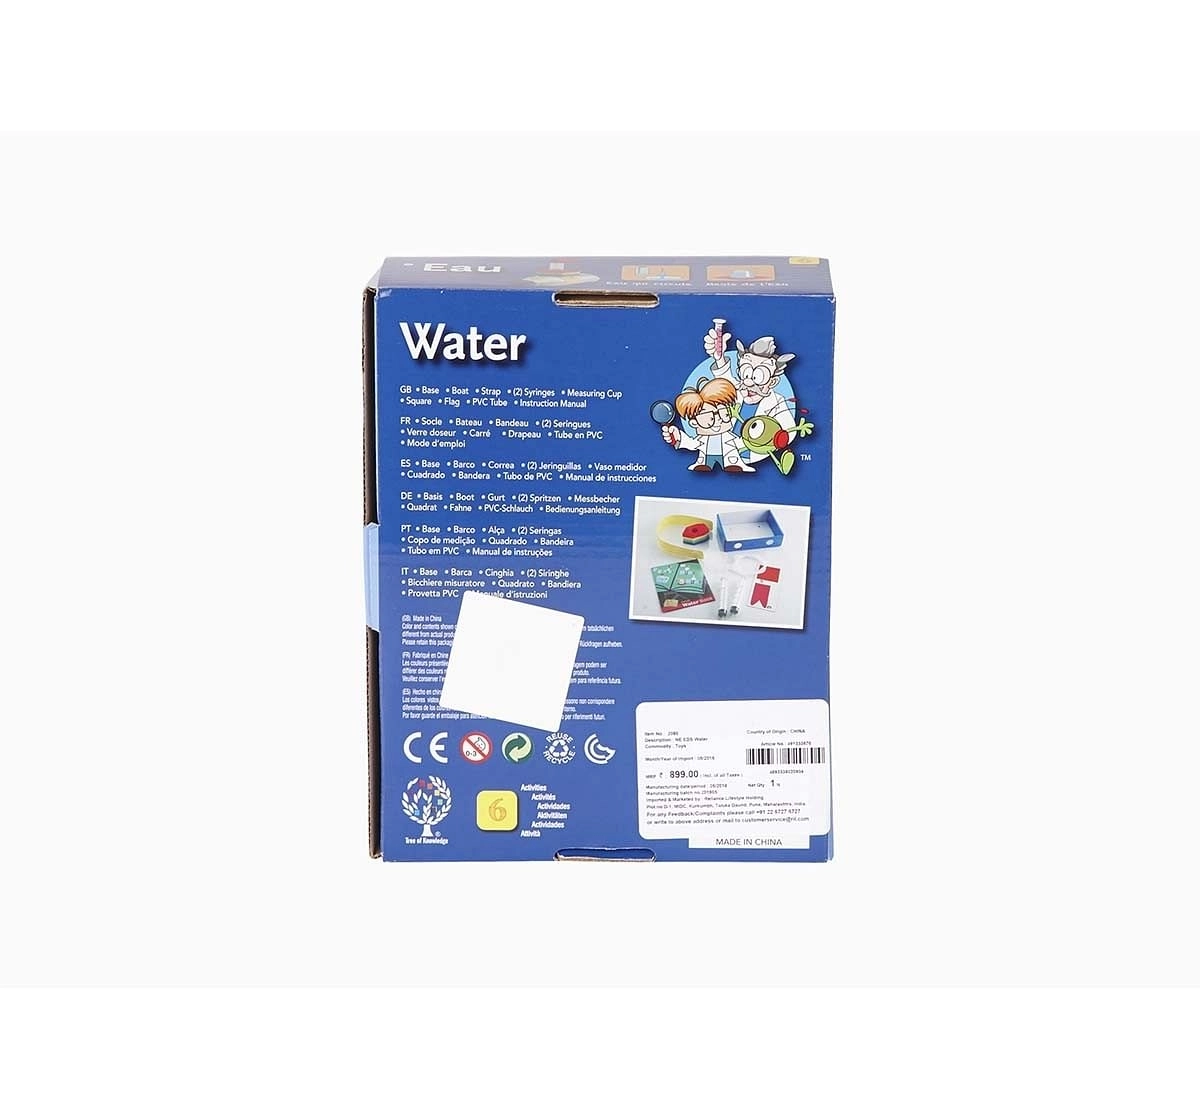 Eduscience Tree Of Knowledge Water Science Kits for Kids age 5Y+ 